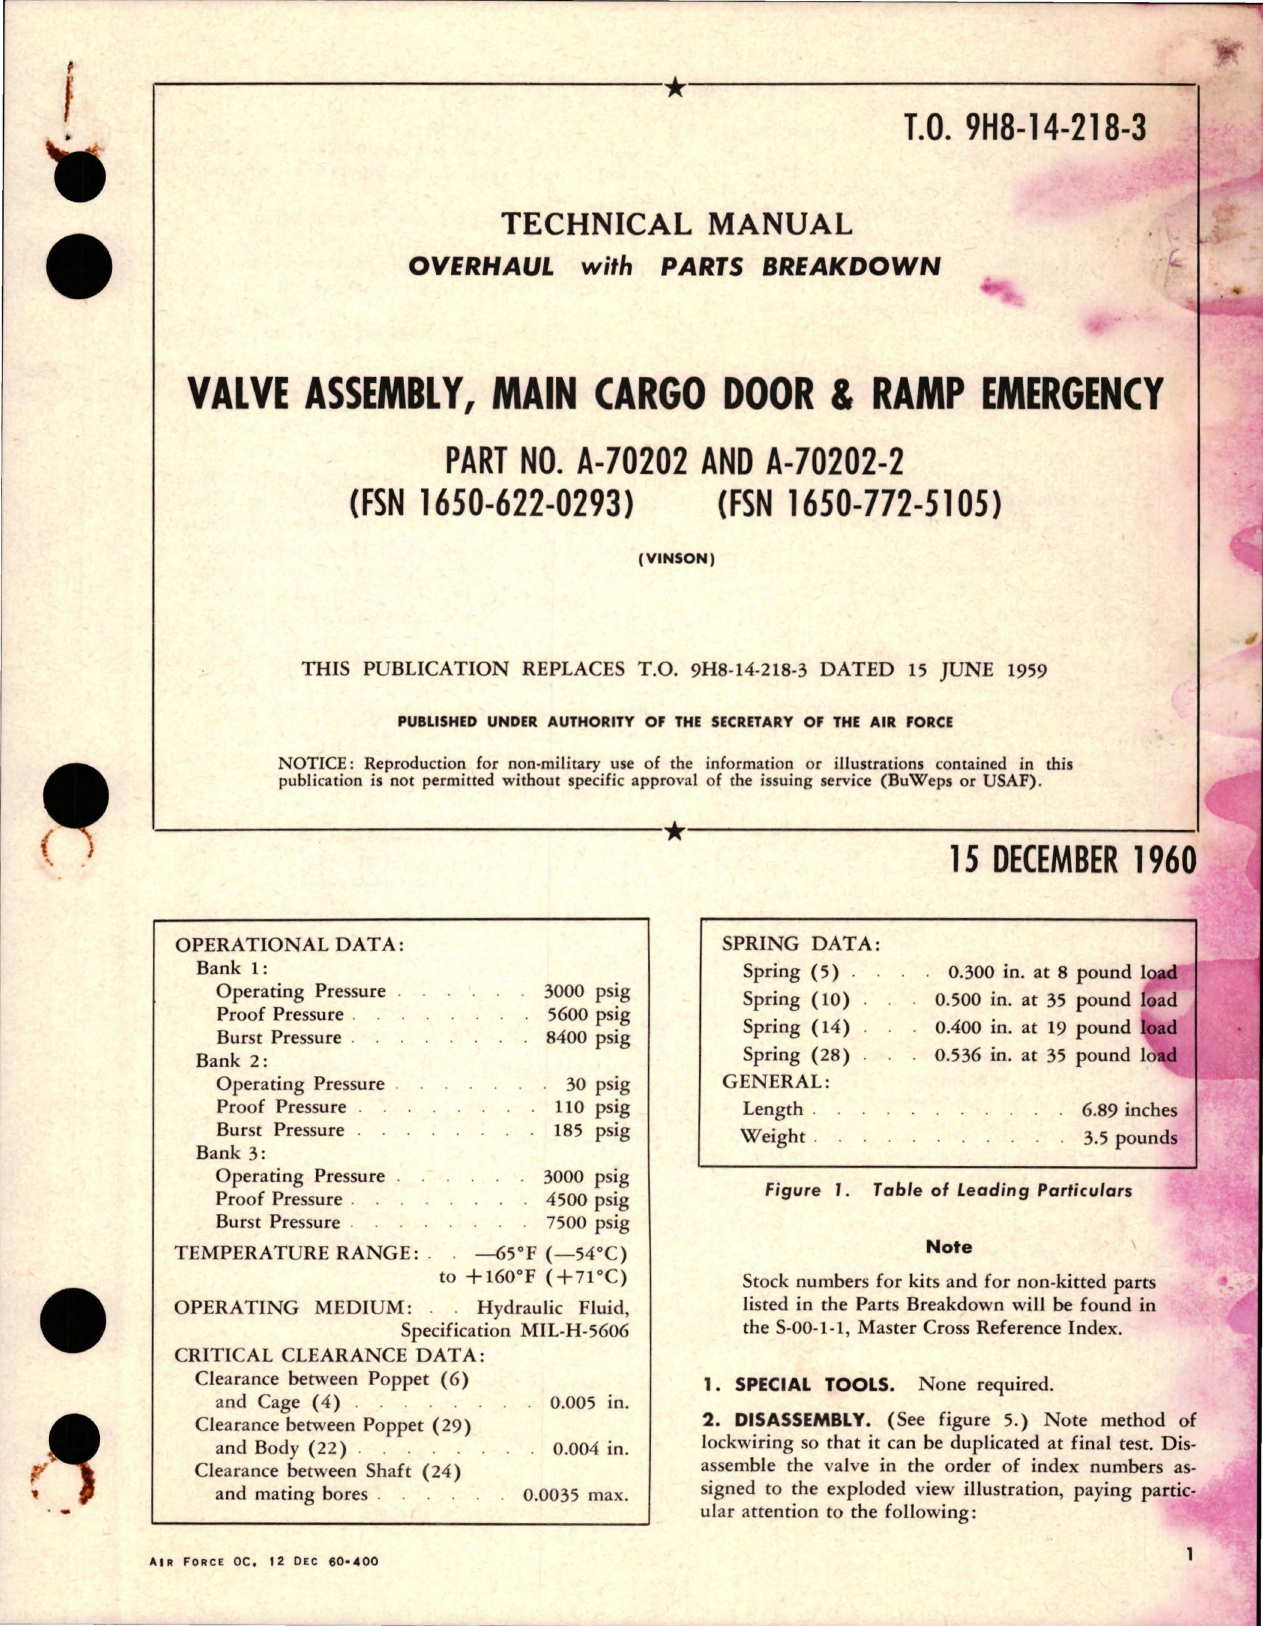 Sample page 1 from AirCorps Library document: Overhaul with Parts Breakdown for Main Cargo Door & Ramp Emergency Valve Assembly - Parts A-70202 and A-70202-2